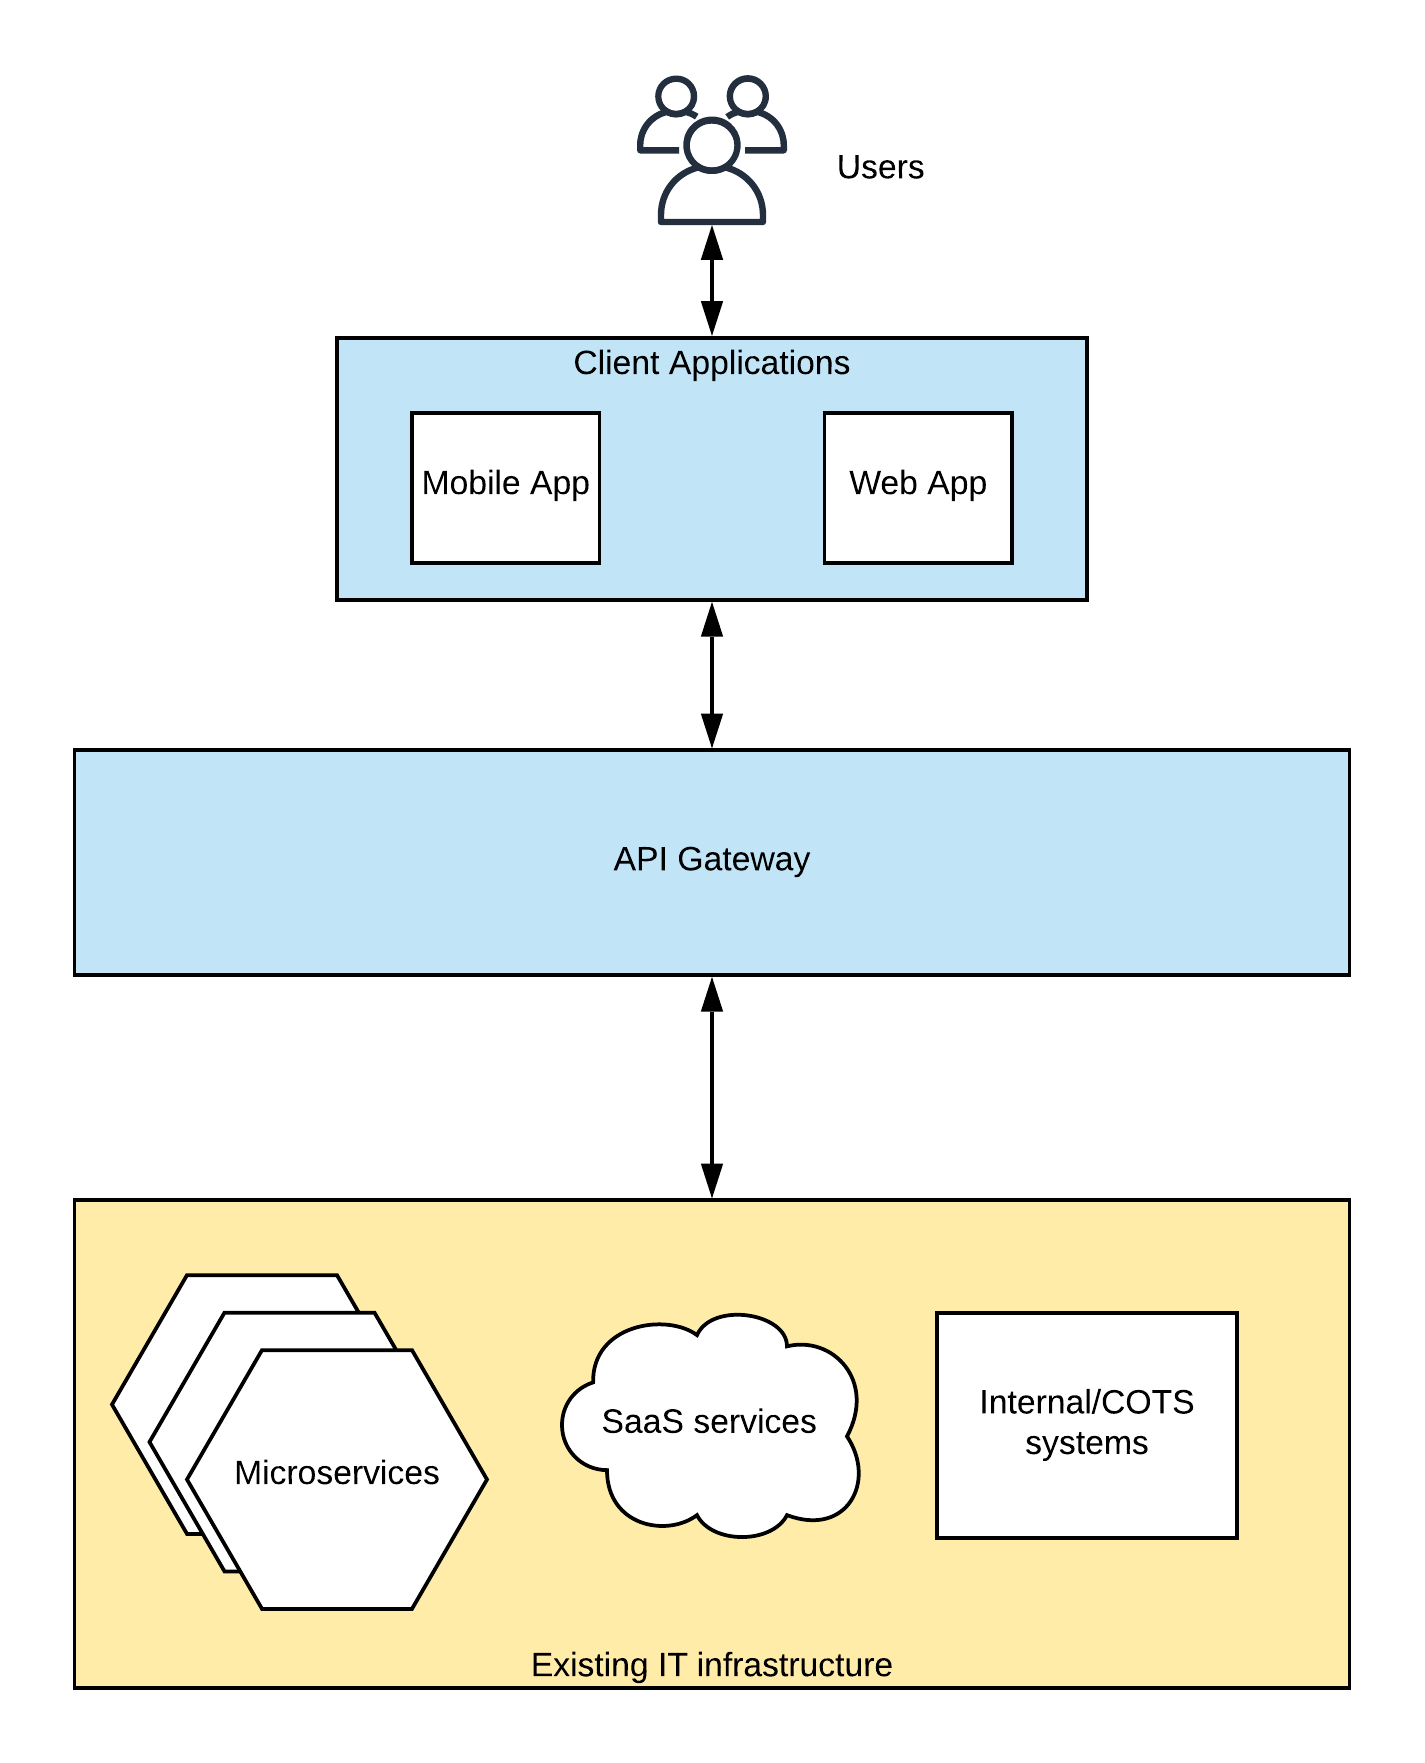 Using an API gateway to expose business functionality to users